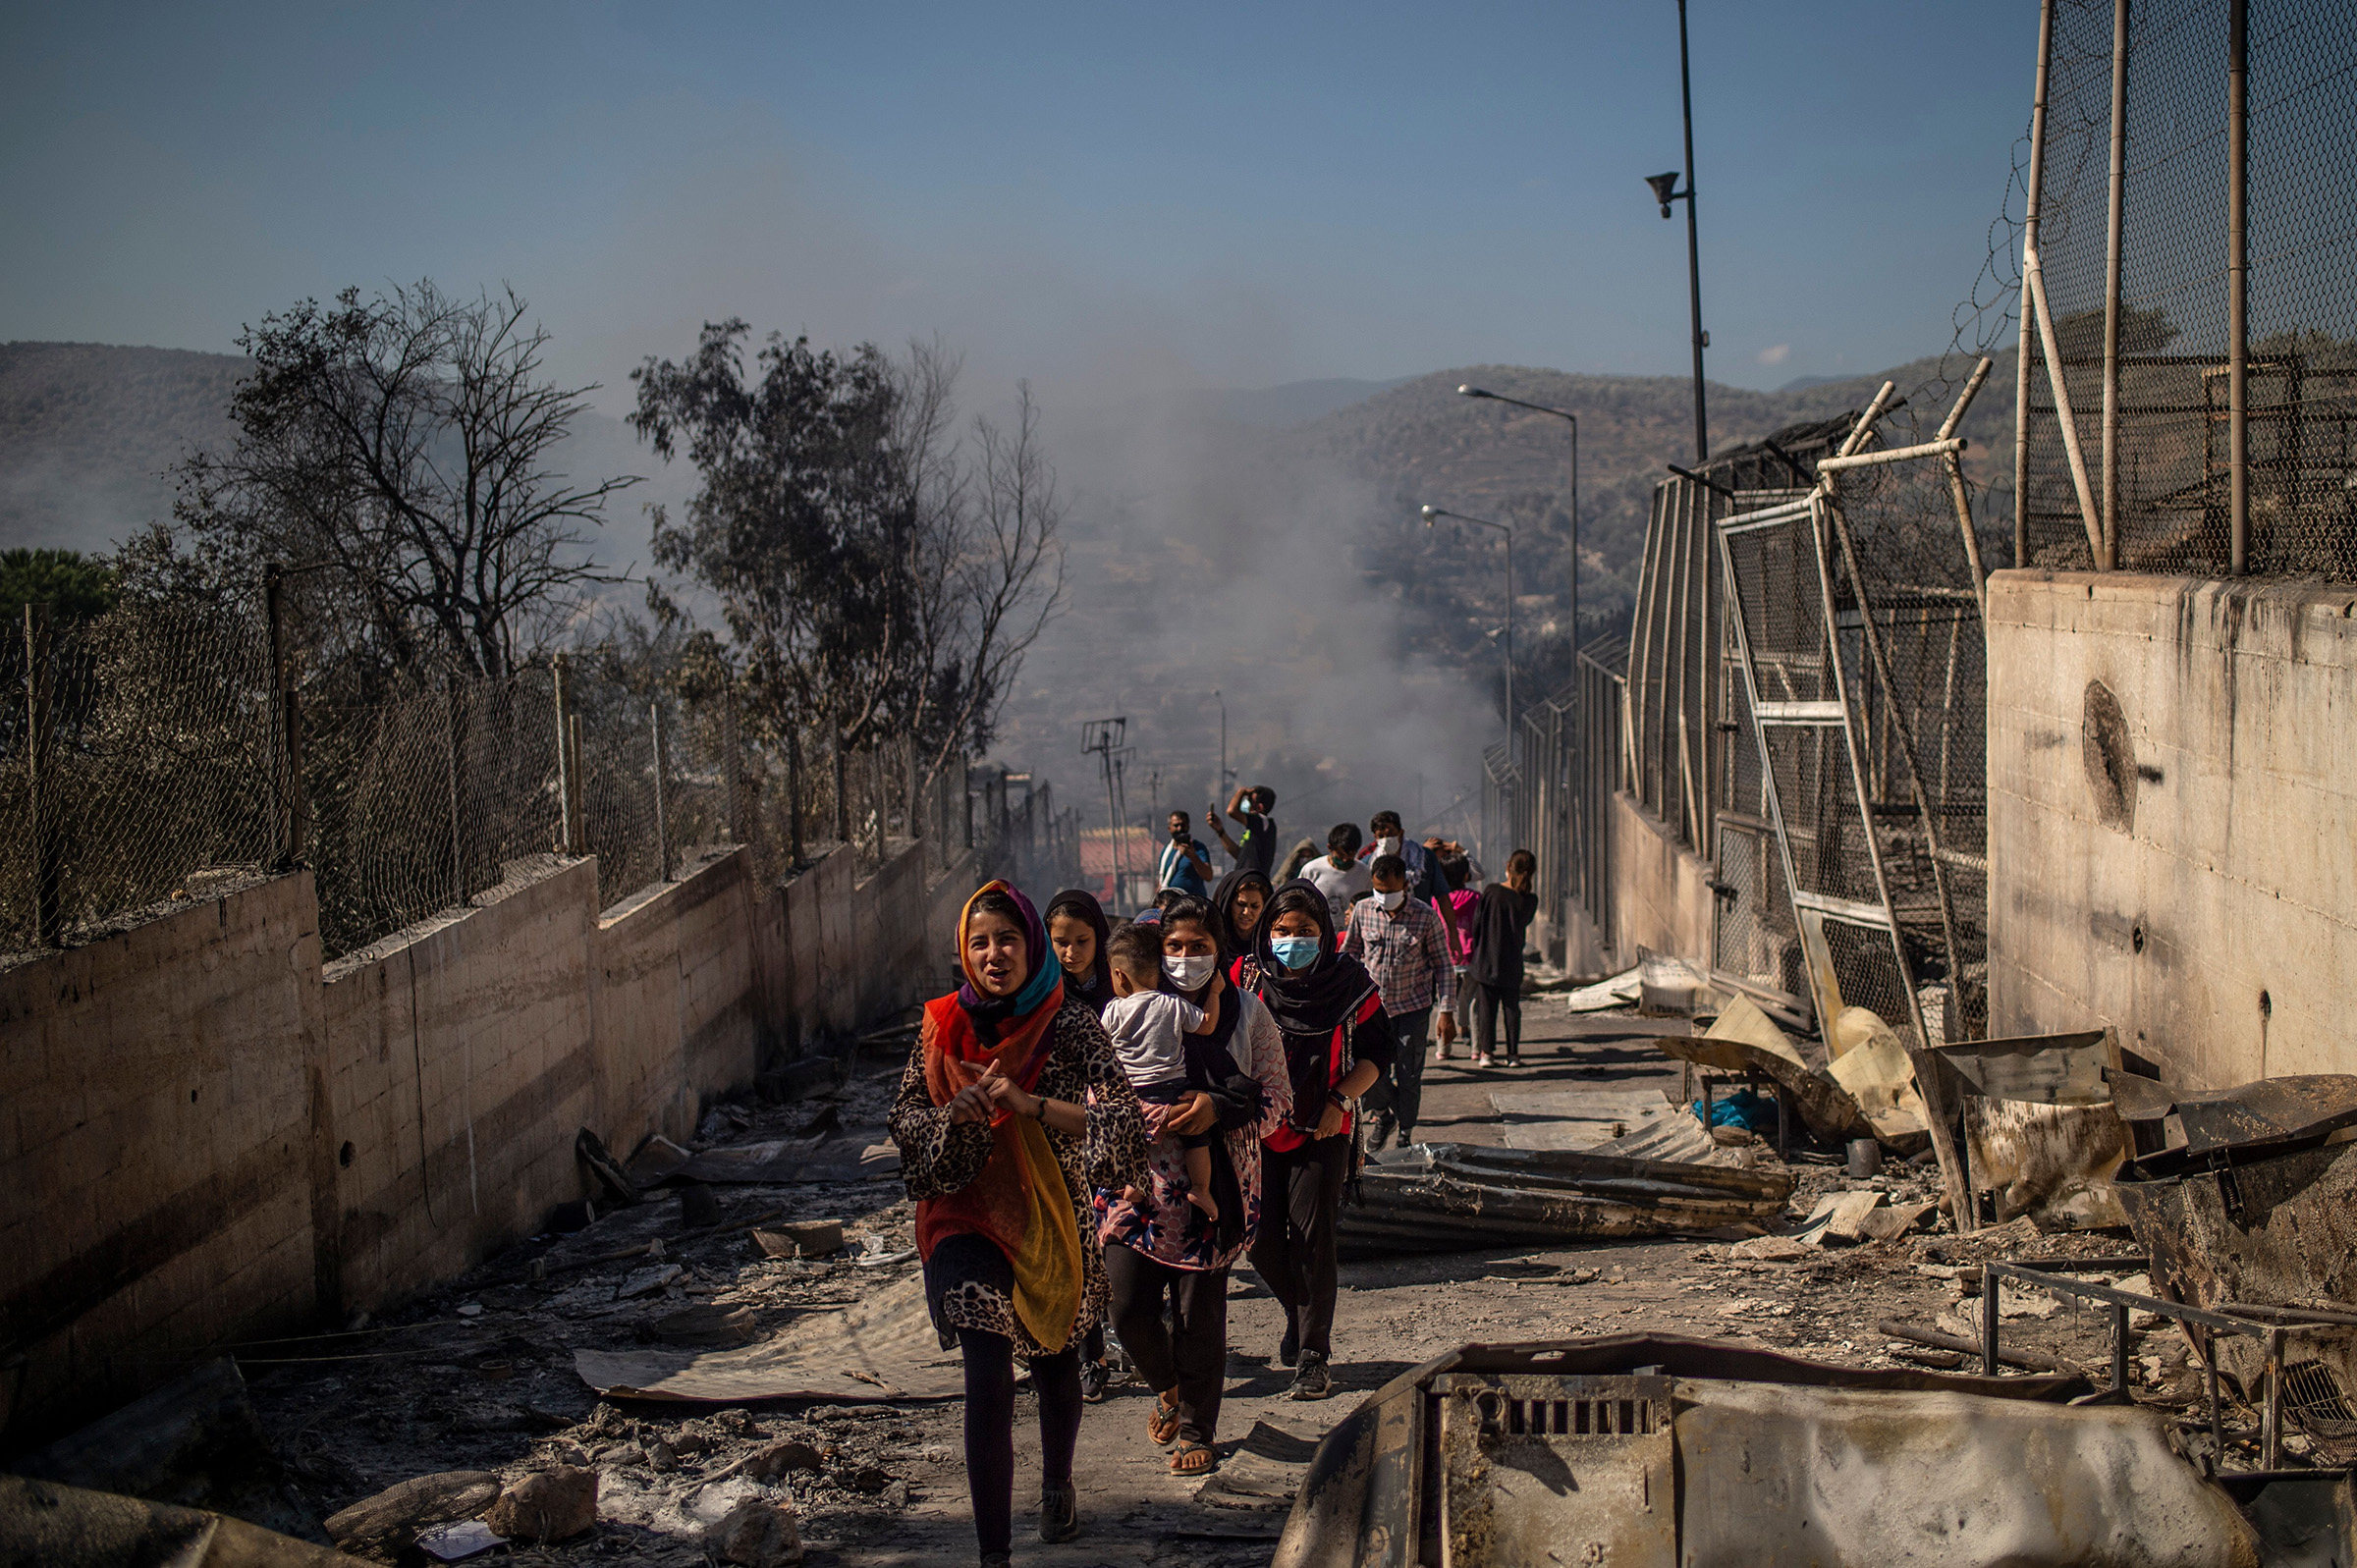 People walk in the burnt camp of Moria on the island of Lesbos after a major fire broke out, on Sept. 9, 2020. (Angelos Tzortzinis—AFP/Getty Images)